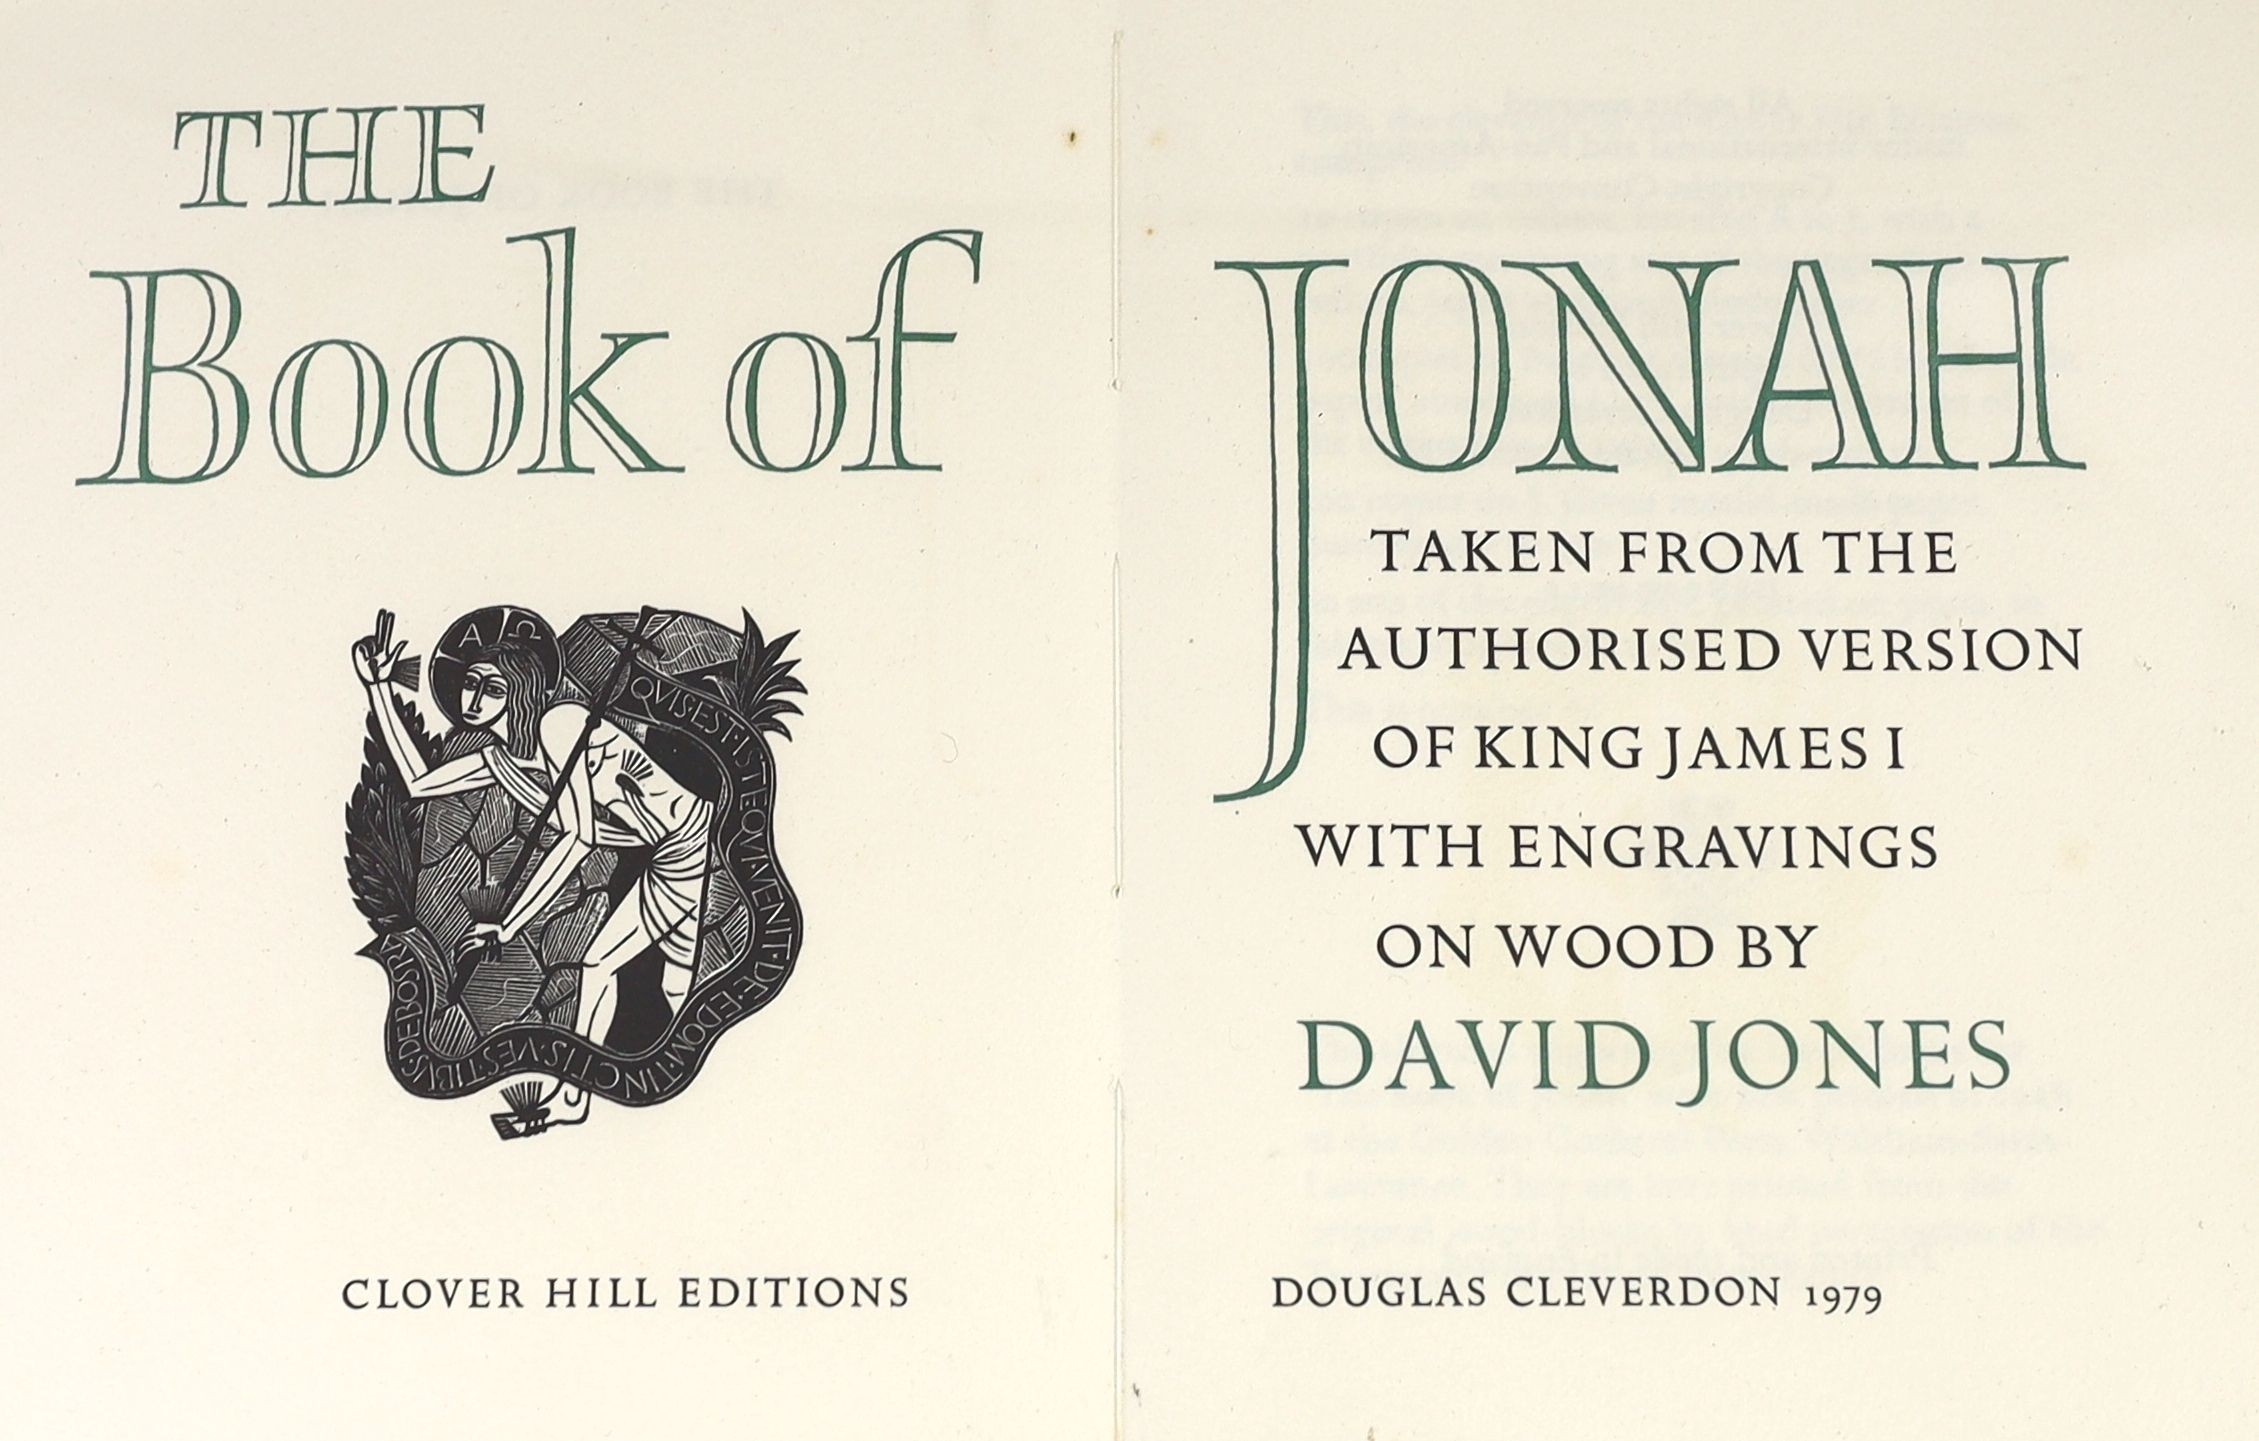 Jones, David [illustrator] - The Book of Jonah… limited edition, No. 41 of 300 printed on J. Green mould-made paper. Numerous wood-cut engravings in the text by David Jones. Quarter cloth and illustrated paper with gilt